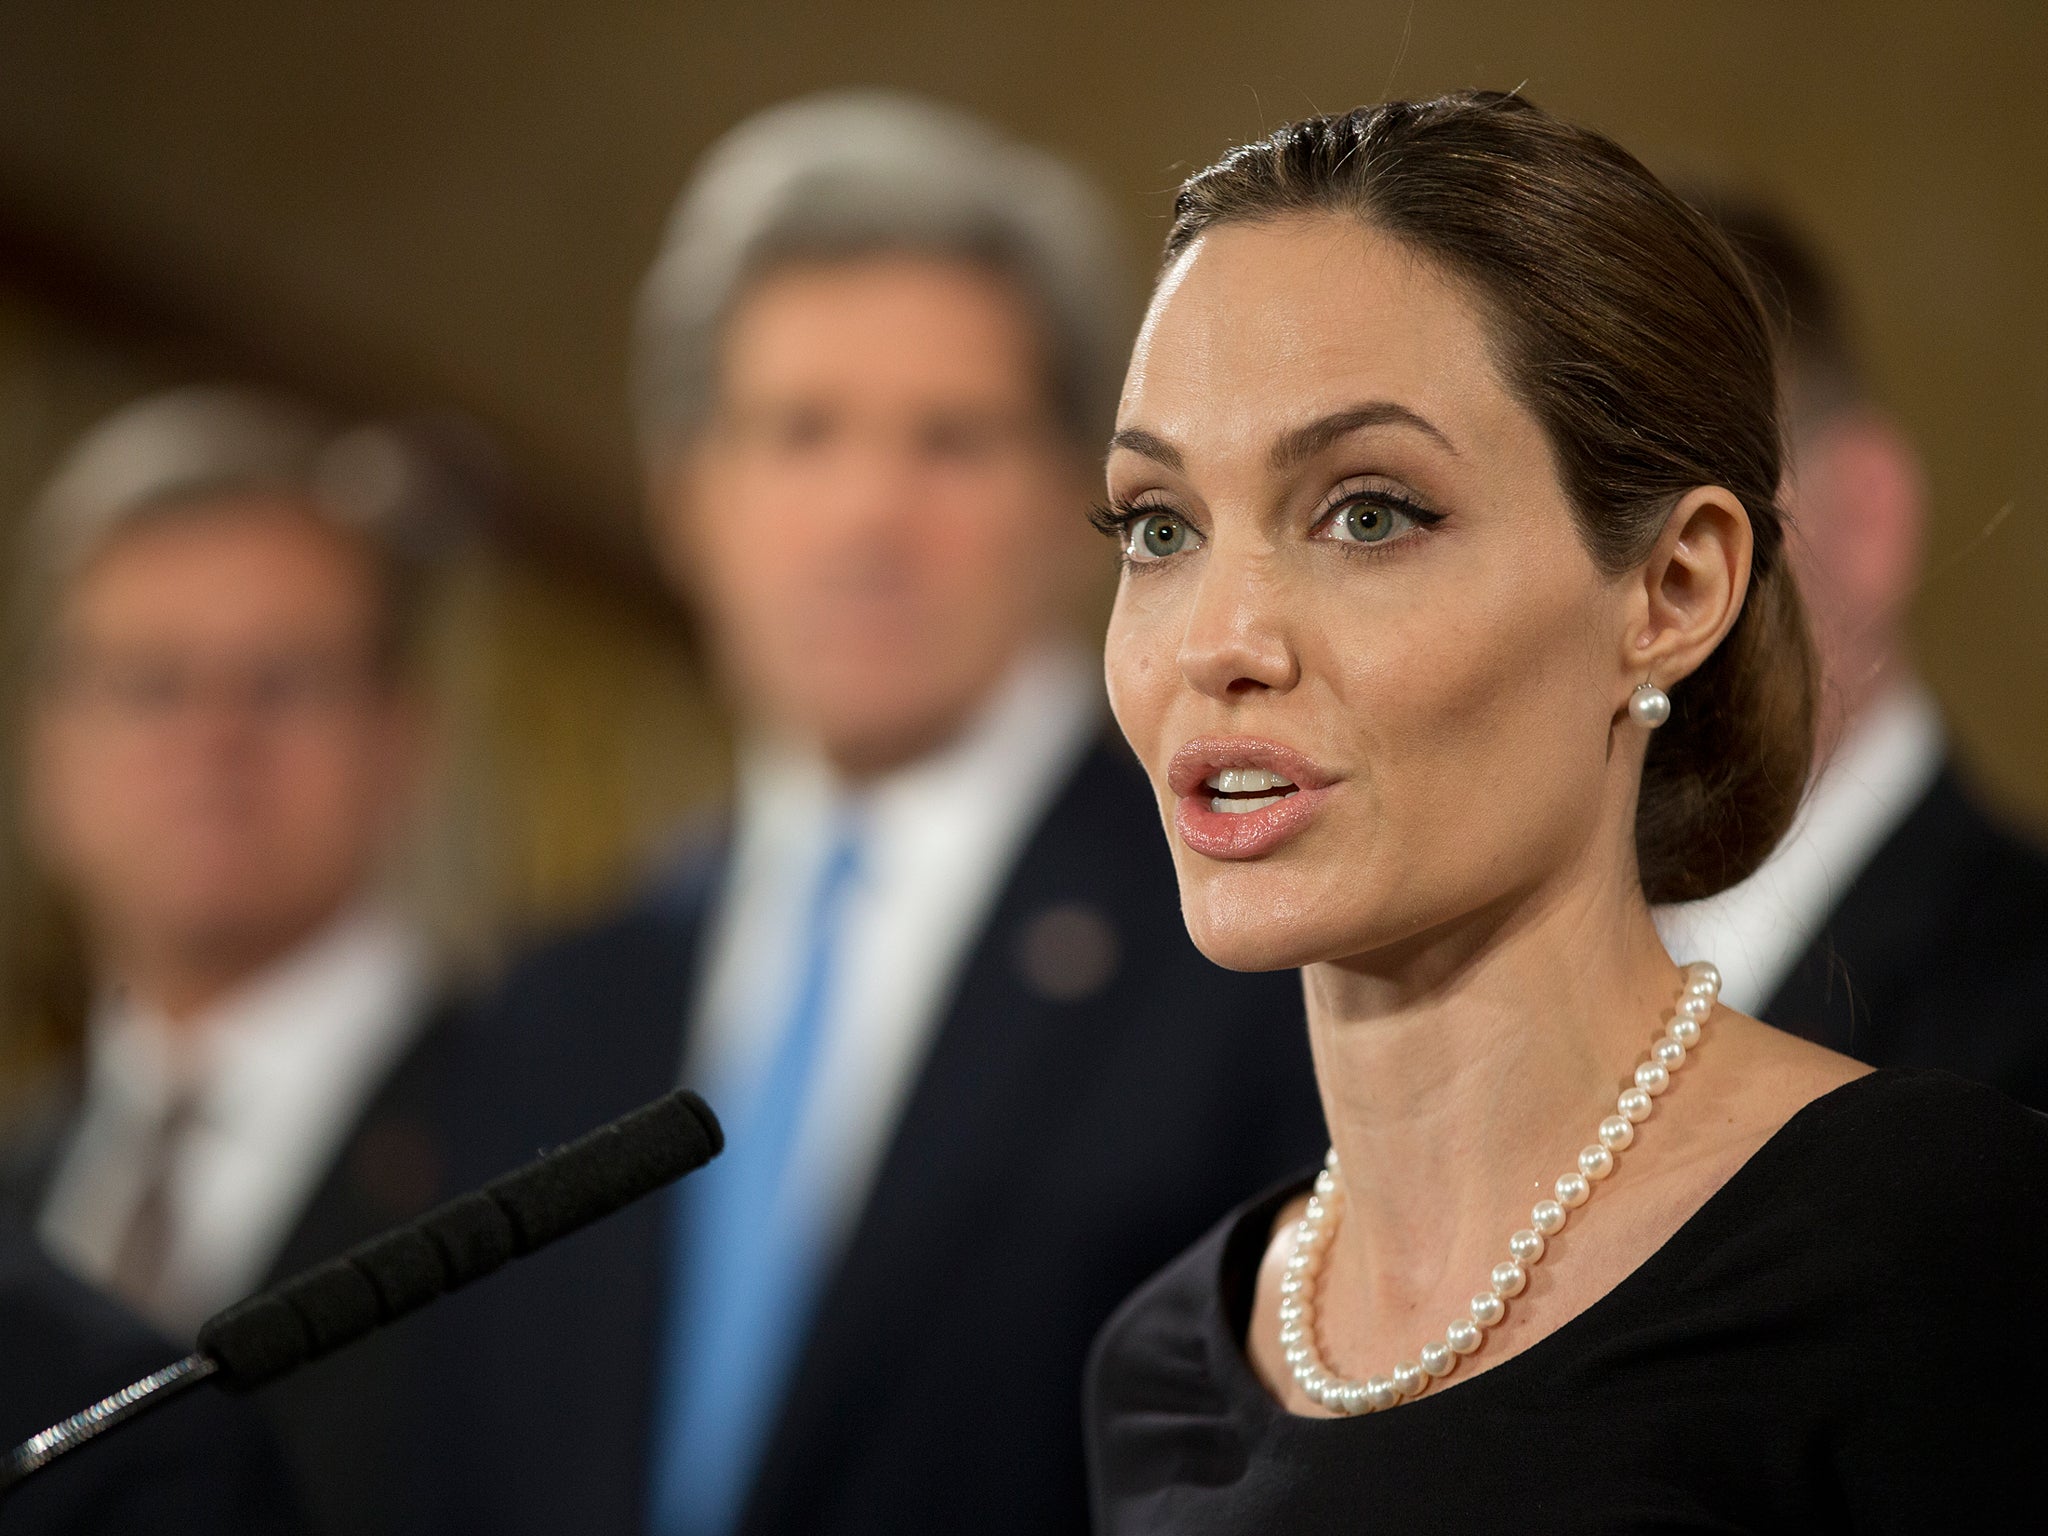 Angelina Jolie-Pitt serves as Special Envoy for the United Nations High Commissioner for Refugees WPA/Getty